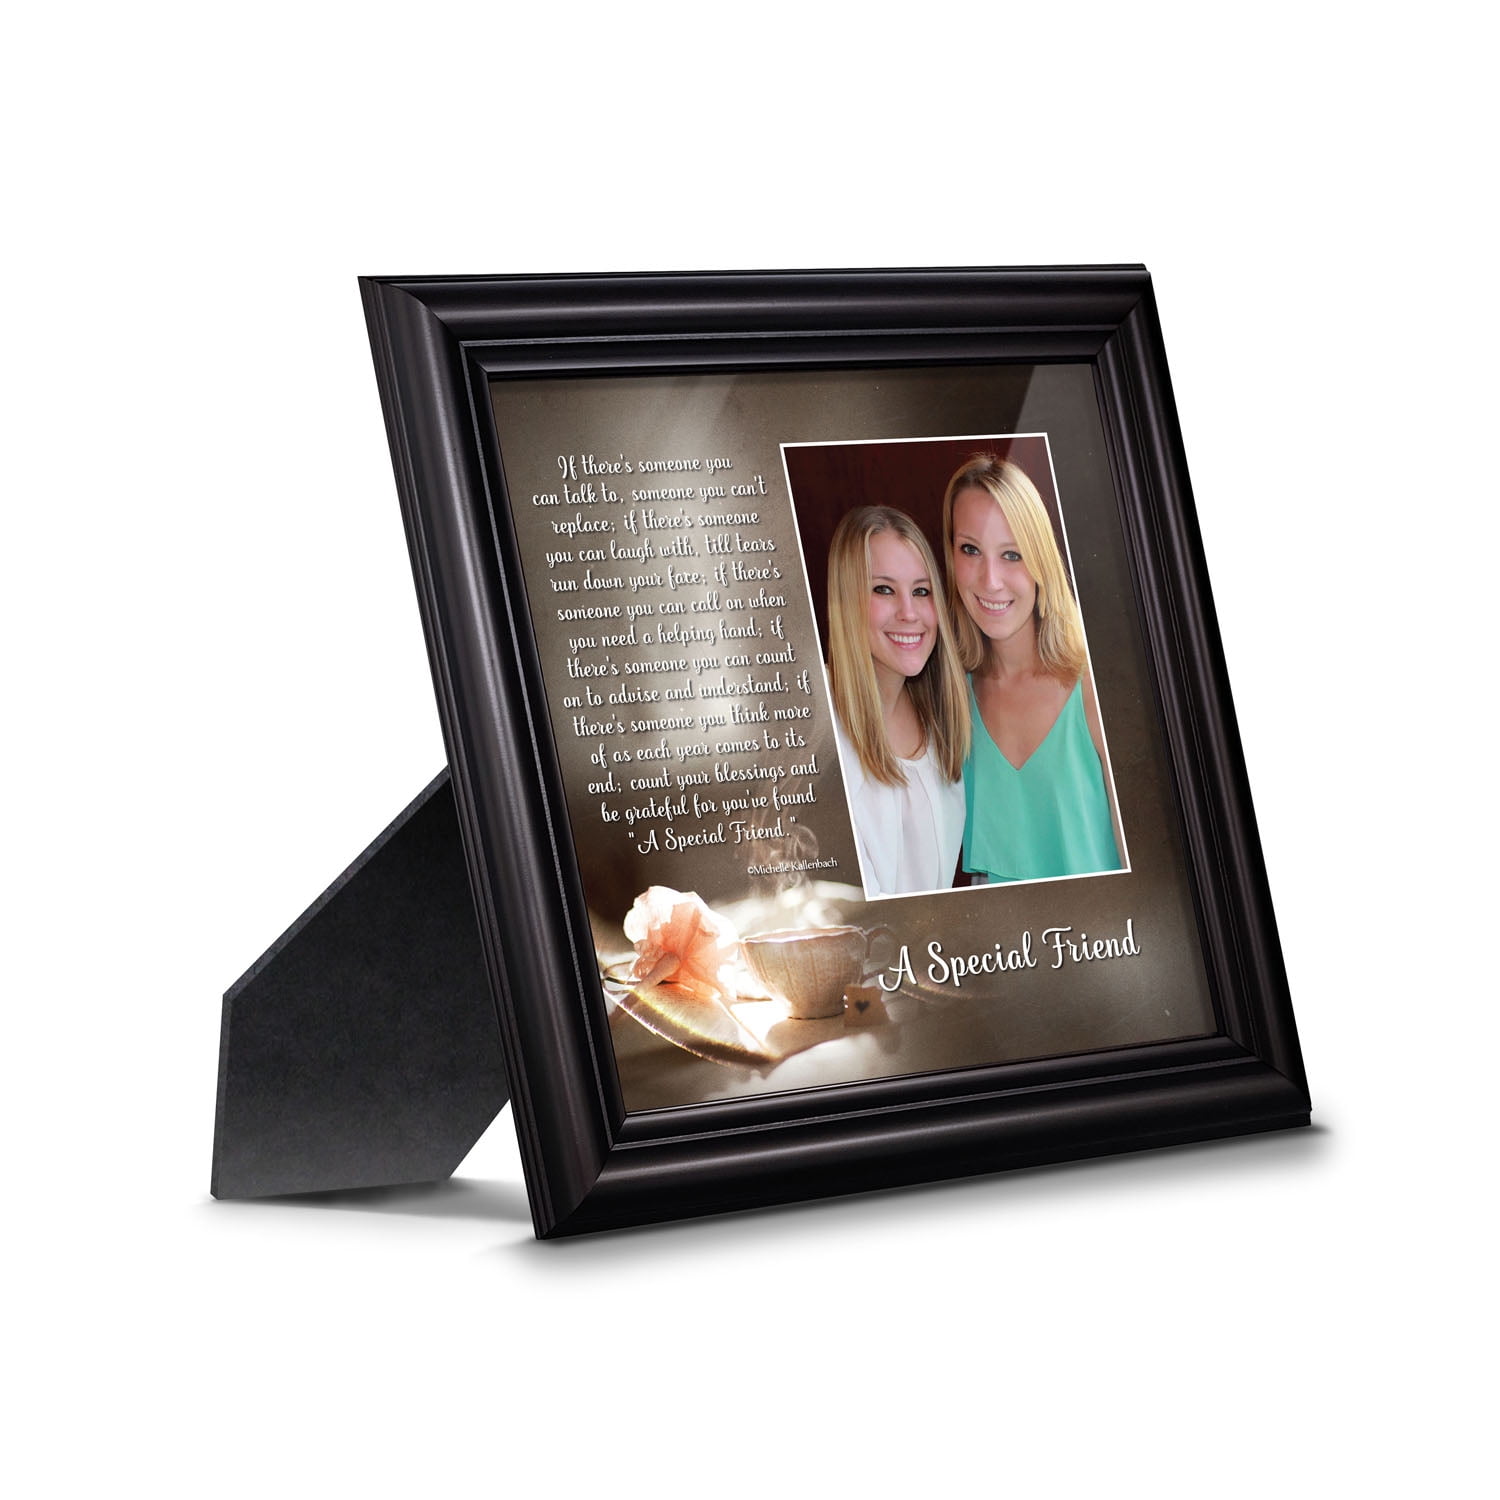 KU-DaYi Best Friend Picture Frame, Birthday Gifts for Best Friend Woman, Long Distance Friendship Gifts 4x6 in Photo - F027